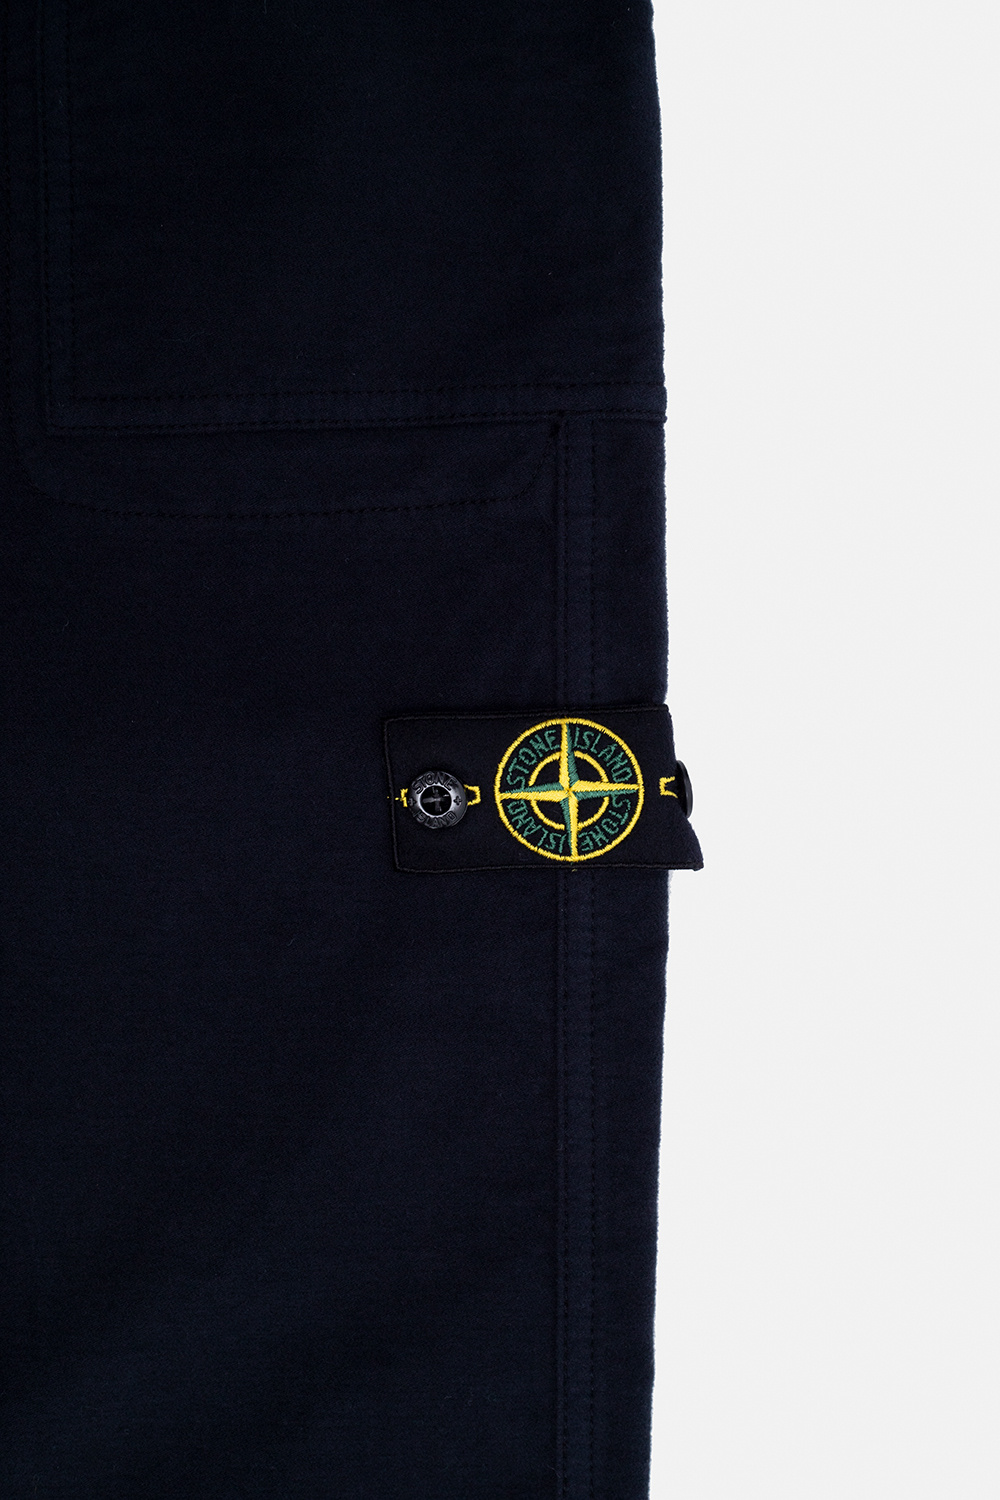 Stone Island Kids roll-neck trousers with logo